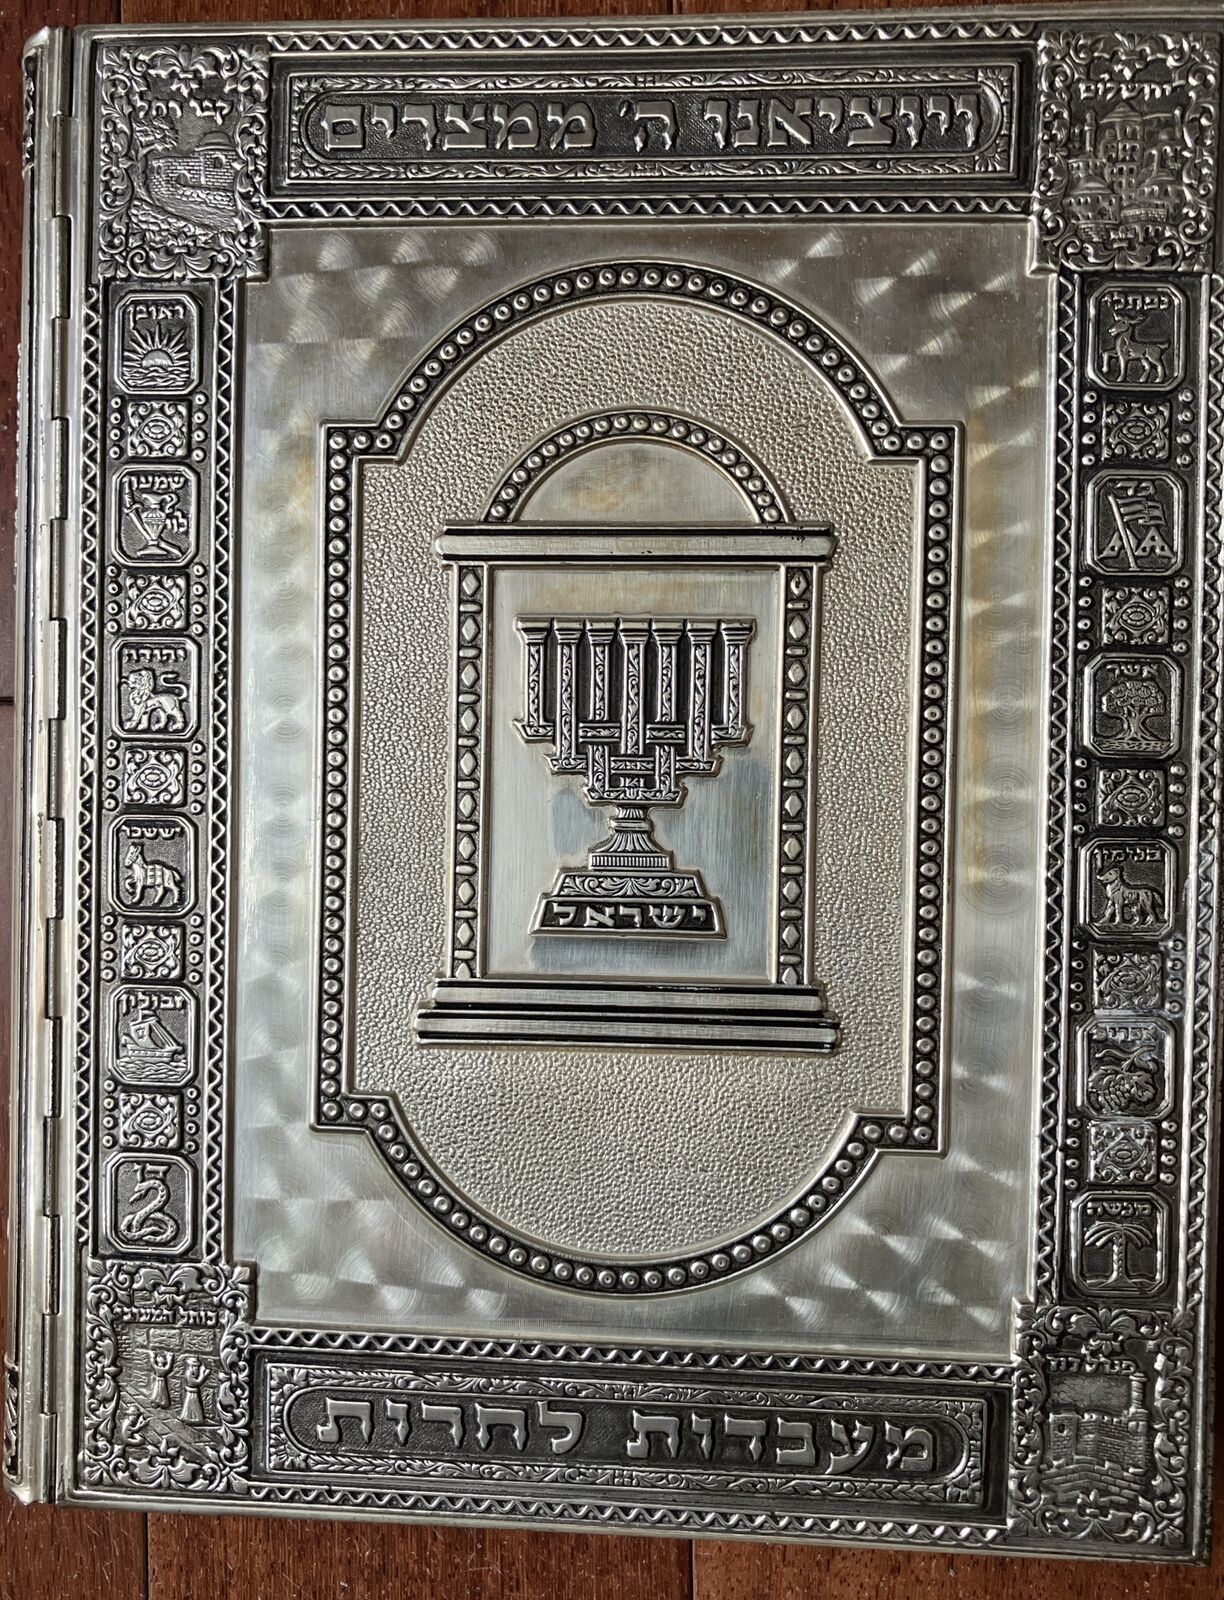 Haggadah For Passover Silver Plate Covers By Arthur Szyk